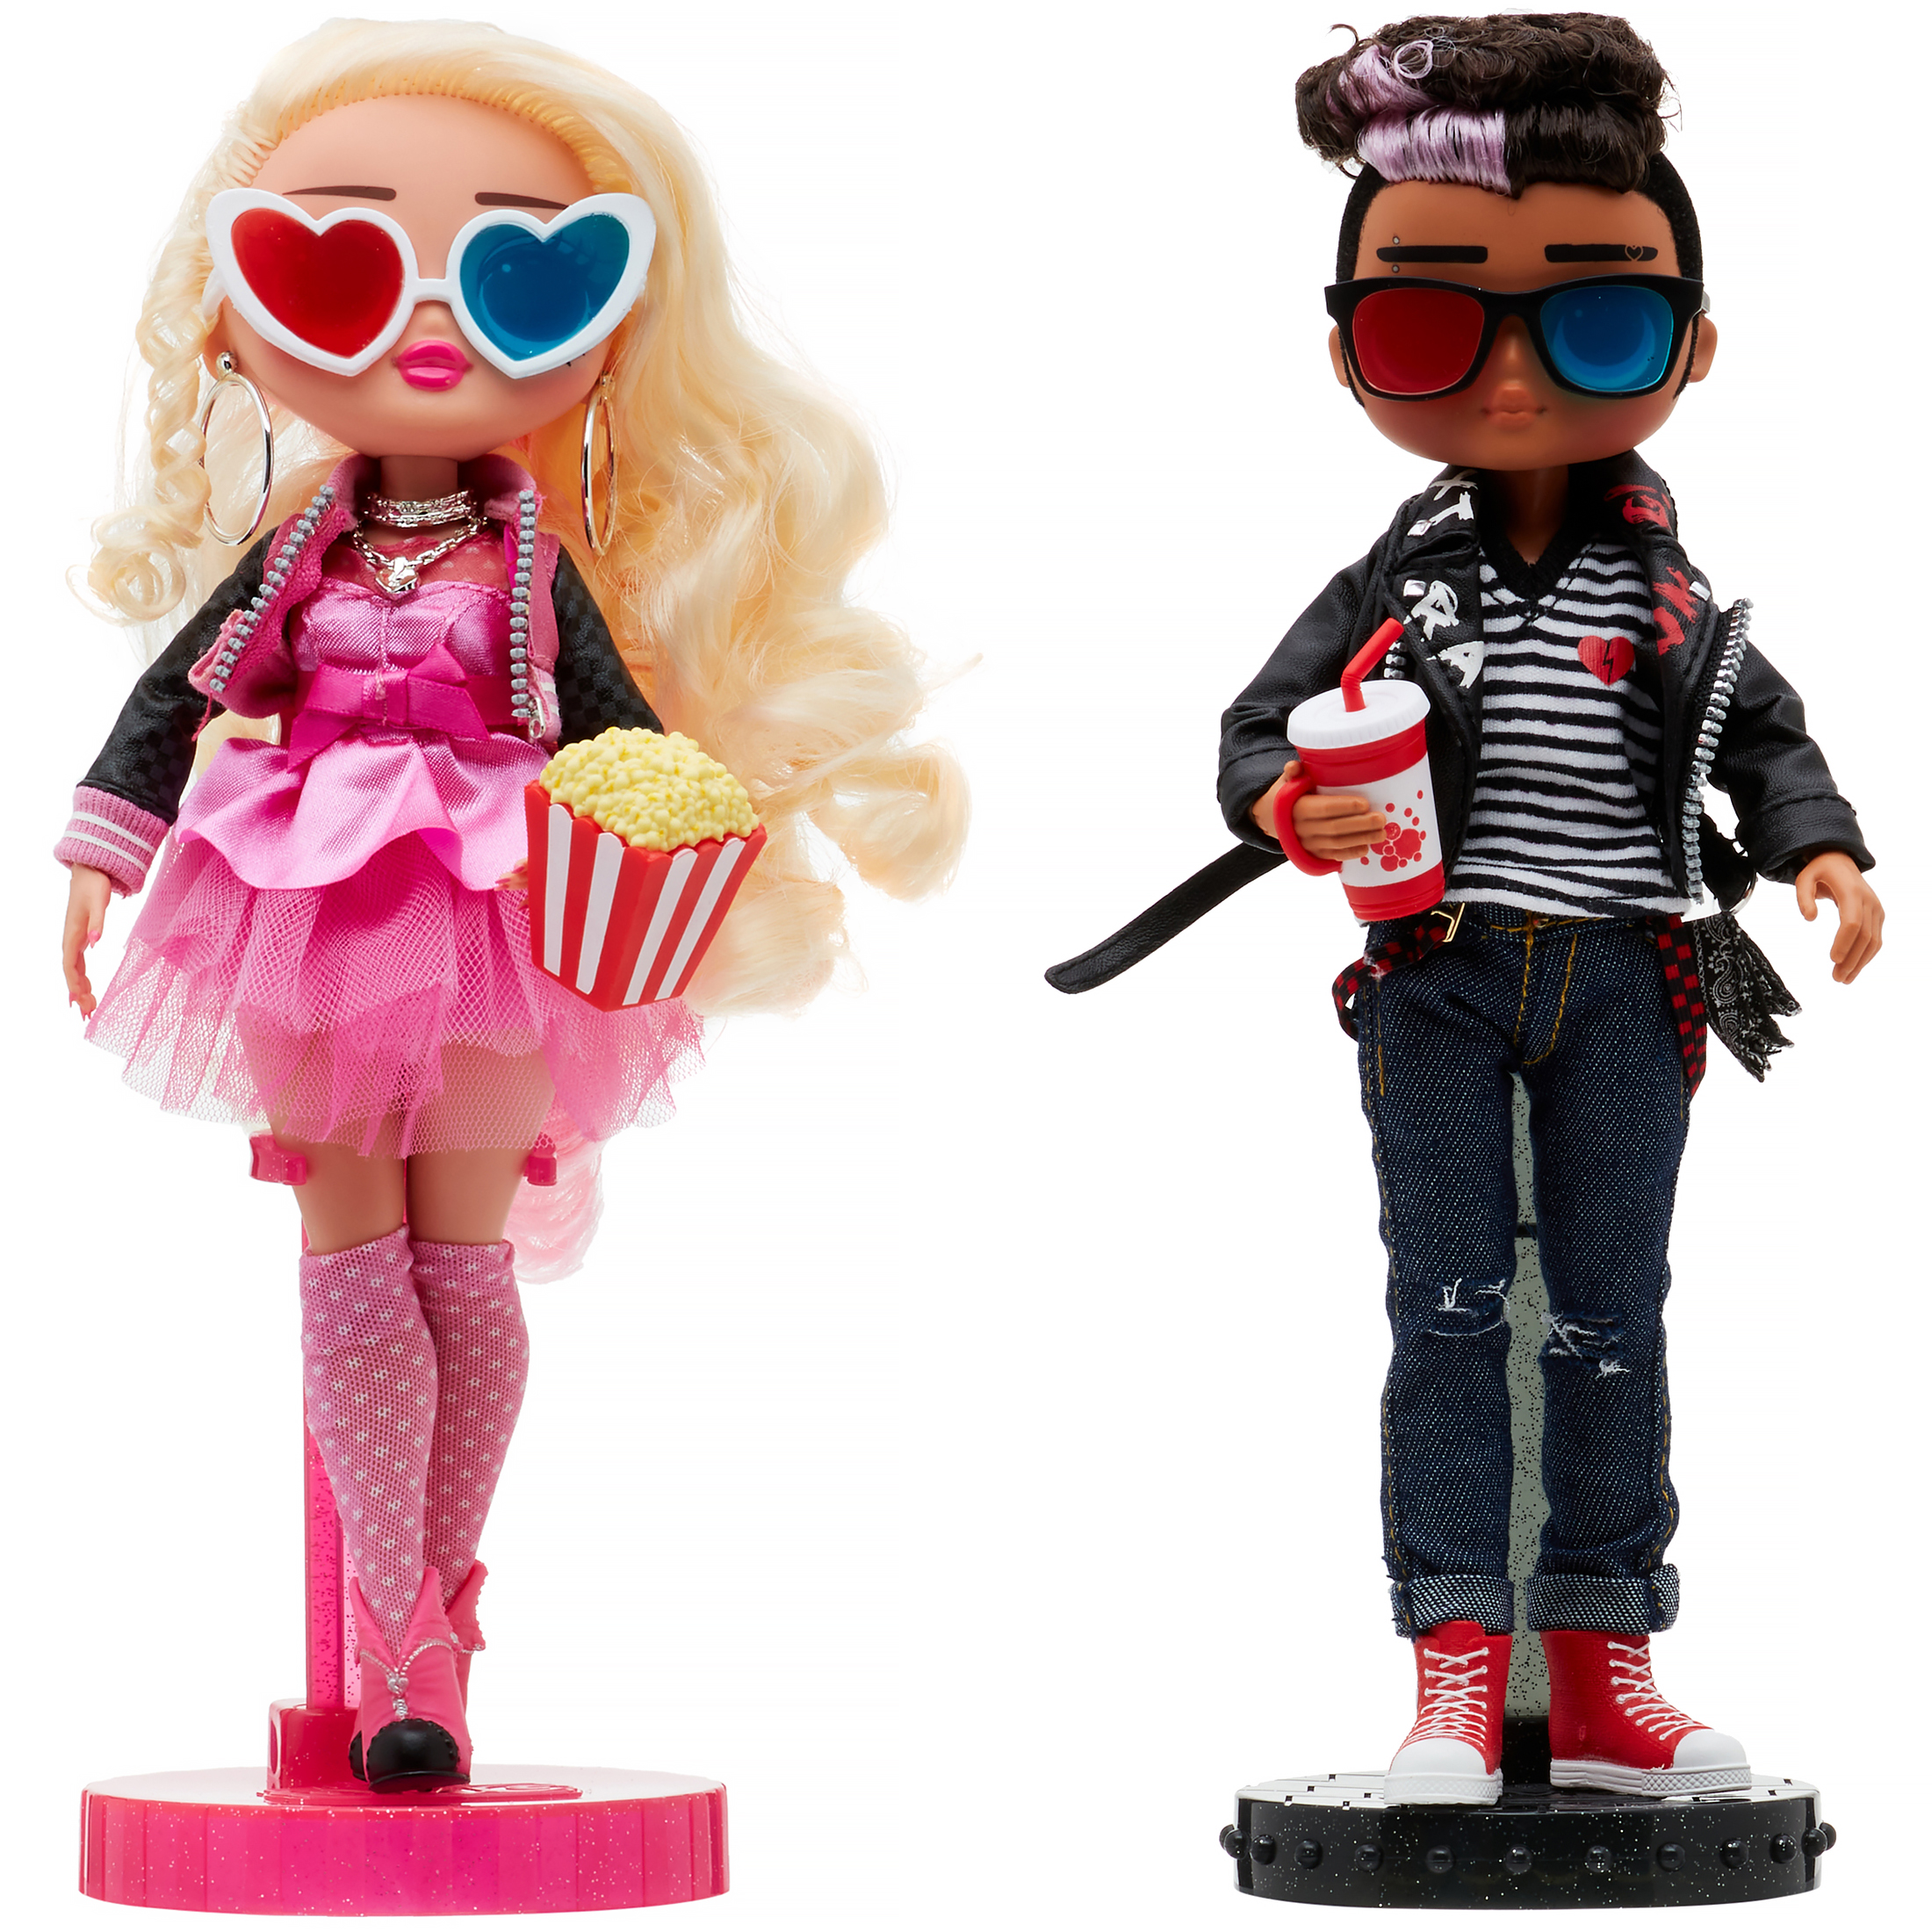 L.O.L Surprise! OMG Movie Magic Fashion Tough Dude and Pink Chick Doll Playset, 25 Pieecs - image 1 of 7